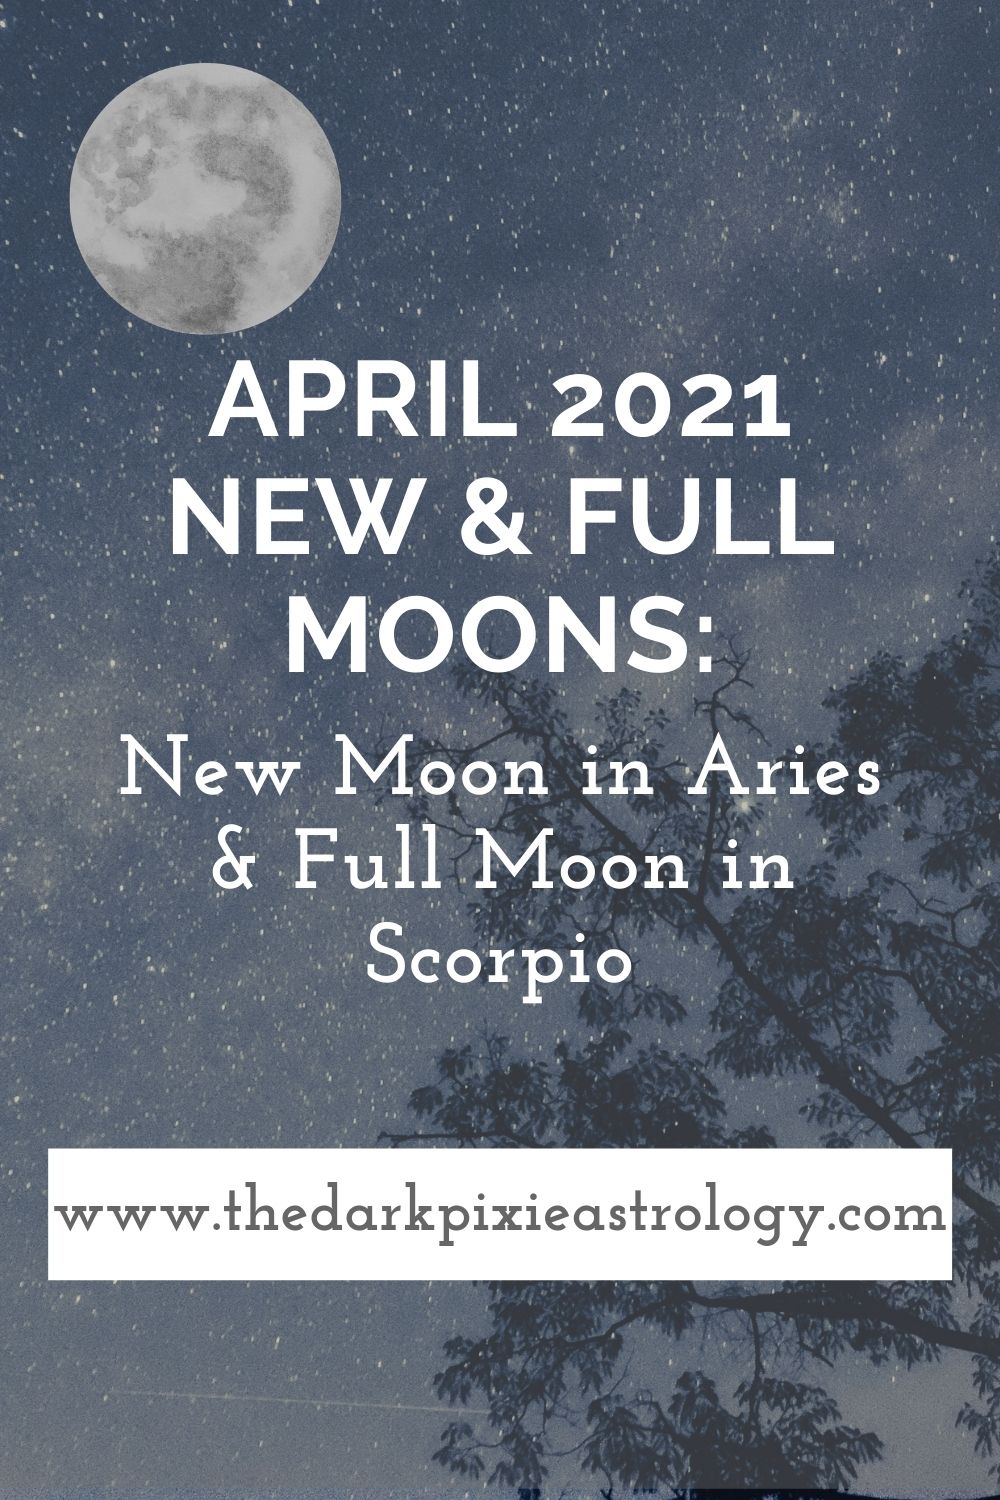 April 2021 New & Full Moons: New Moon in Aries & Full Moon in Scorpio - The Dark Pixie Astrology